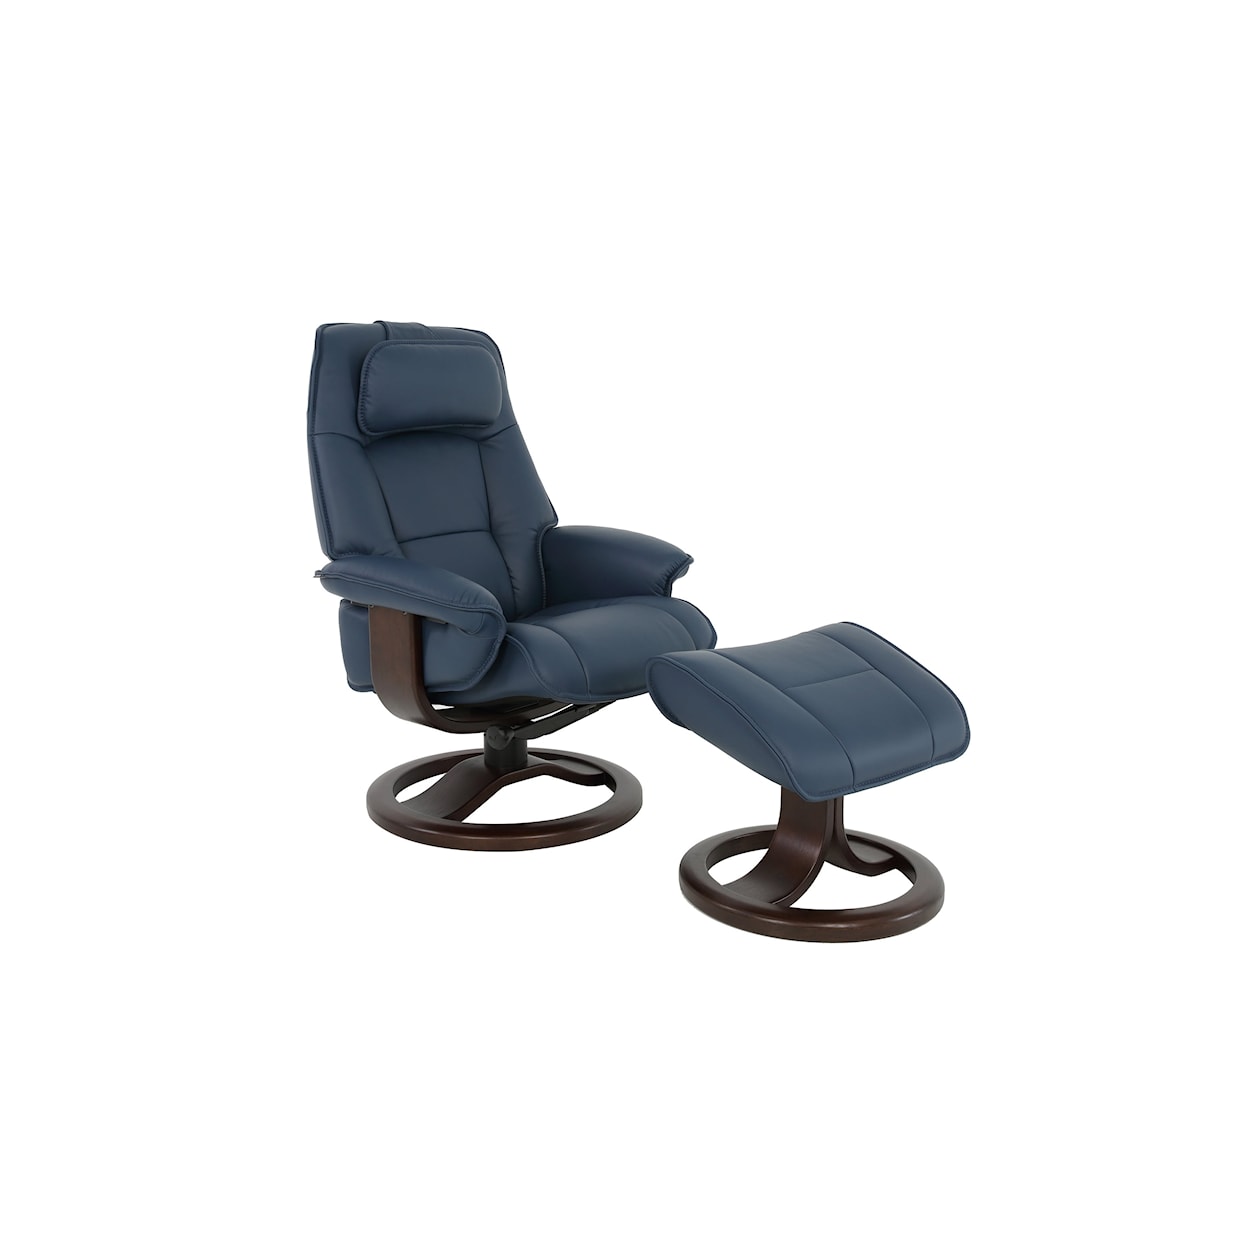 Fjords by Hjellegjerde Classic Comfort Collection Admiral R Large Manual Recliner